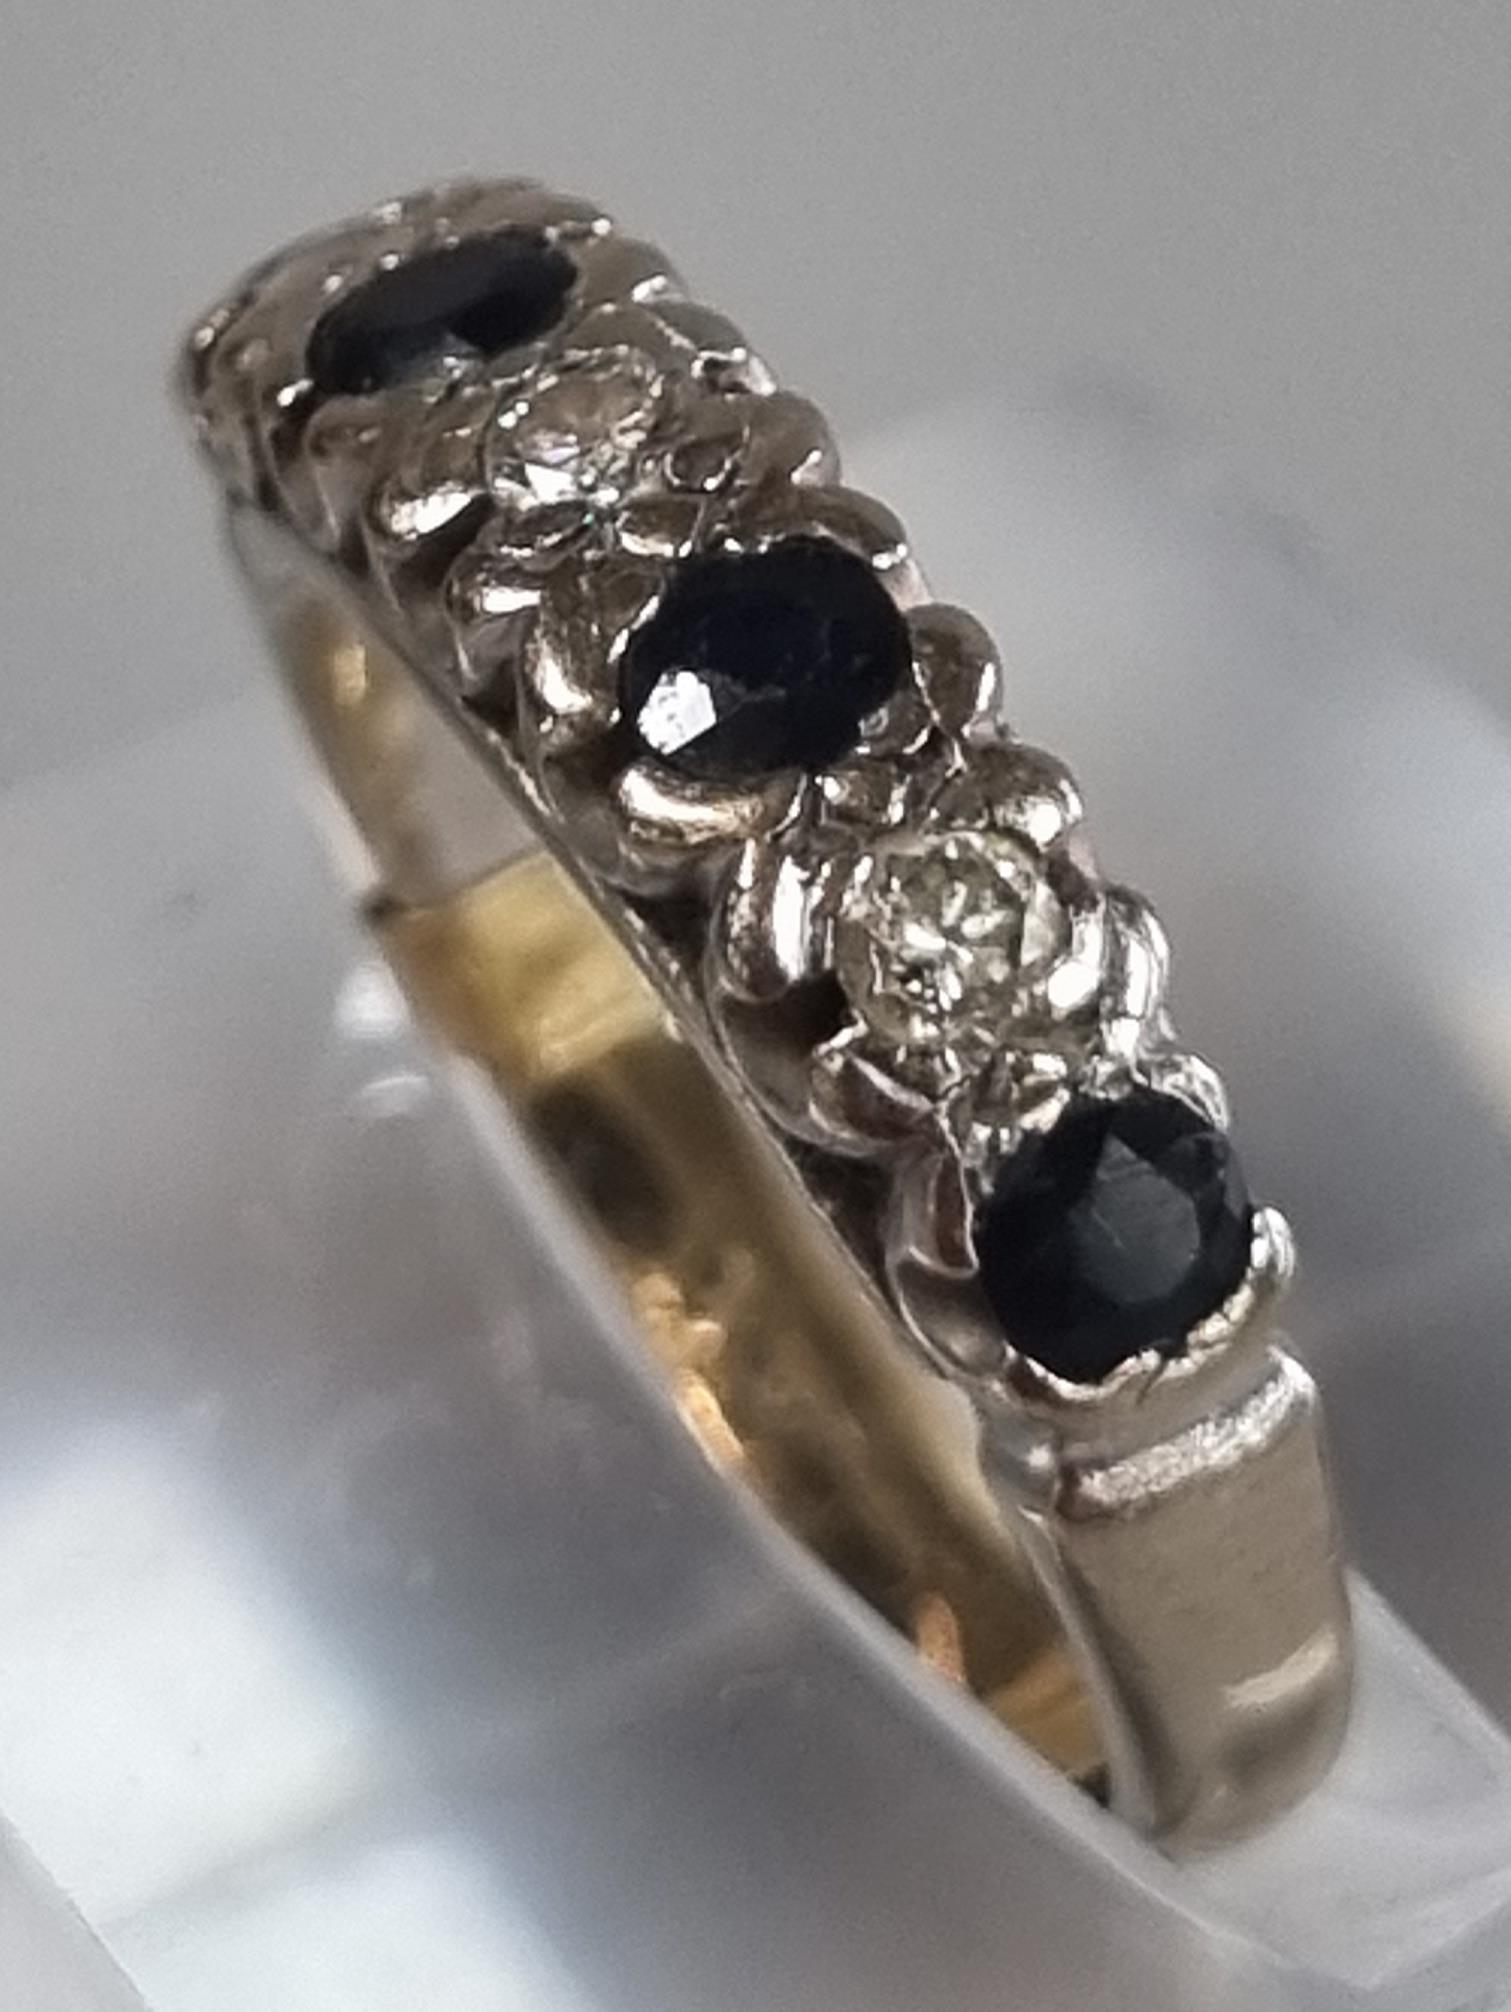 18ct white gold six stone diamond and sapphire ring. 4g approx. Size L1/2. (B.P. 21% + VAT) - Image 3 of 4